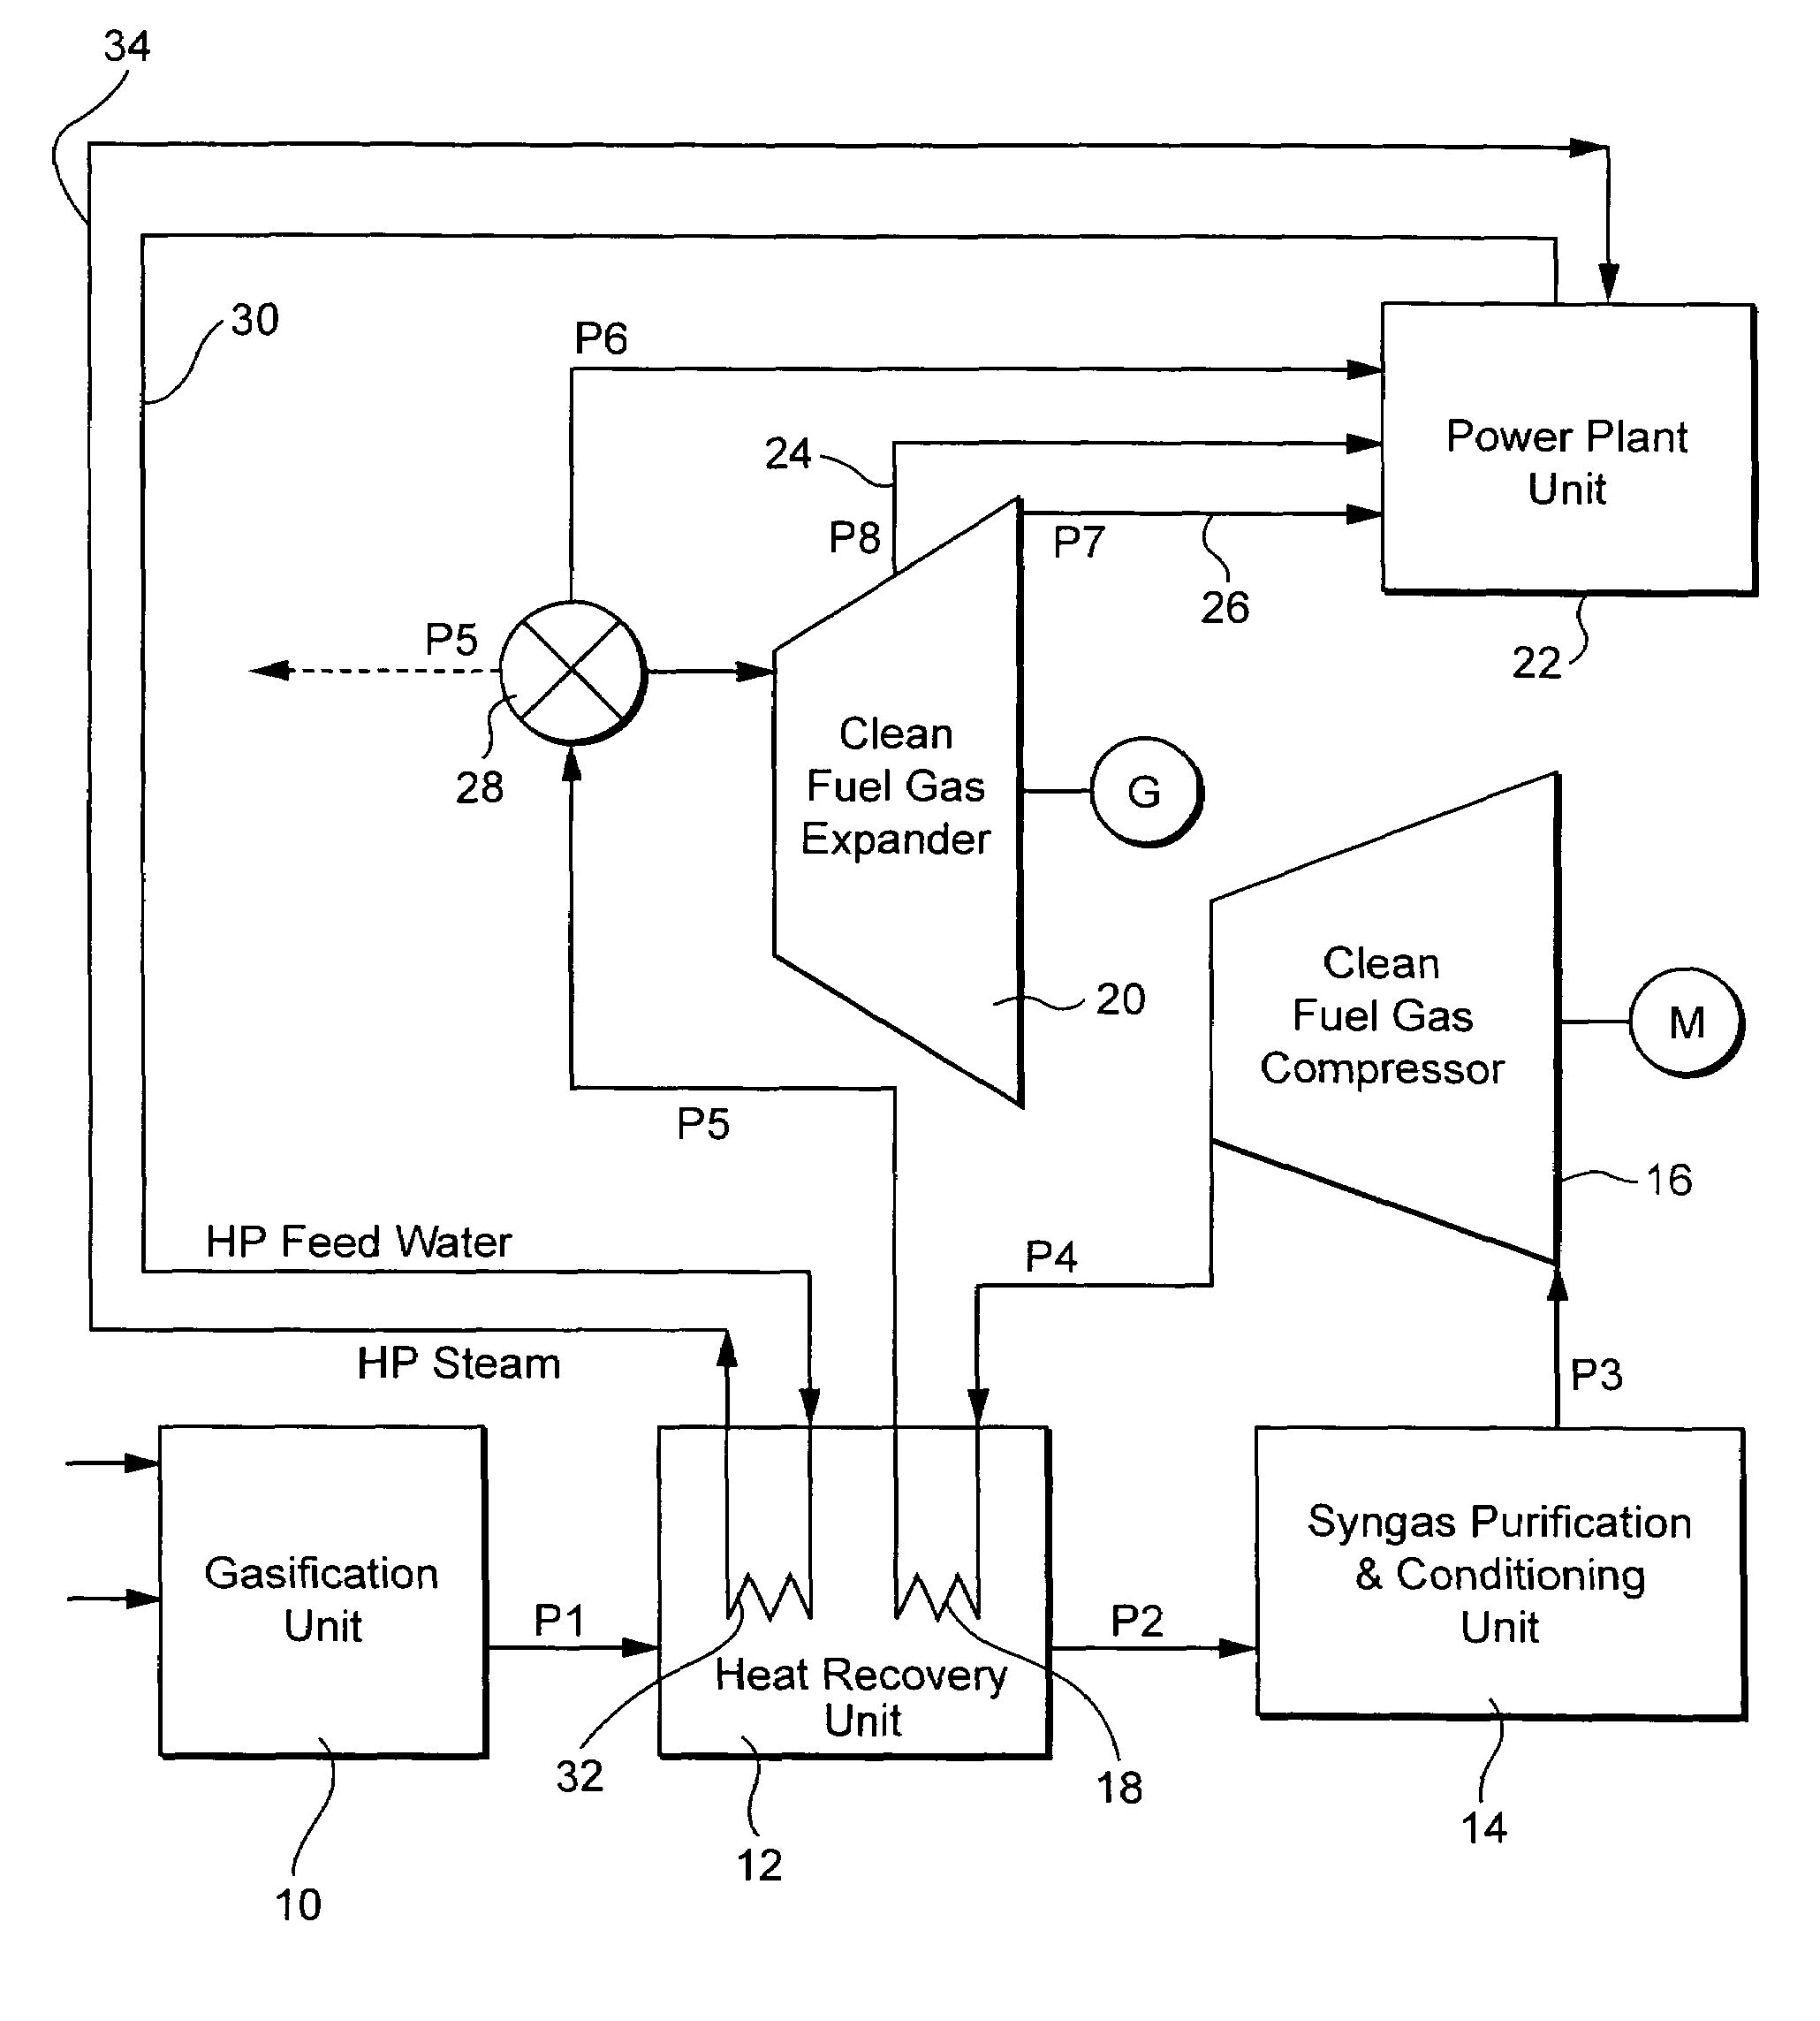 Method and system for heat recovery from dirty gaseous fuel in gasification power plants